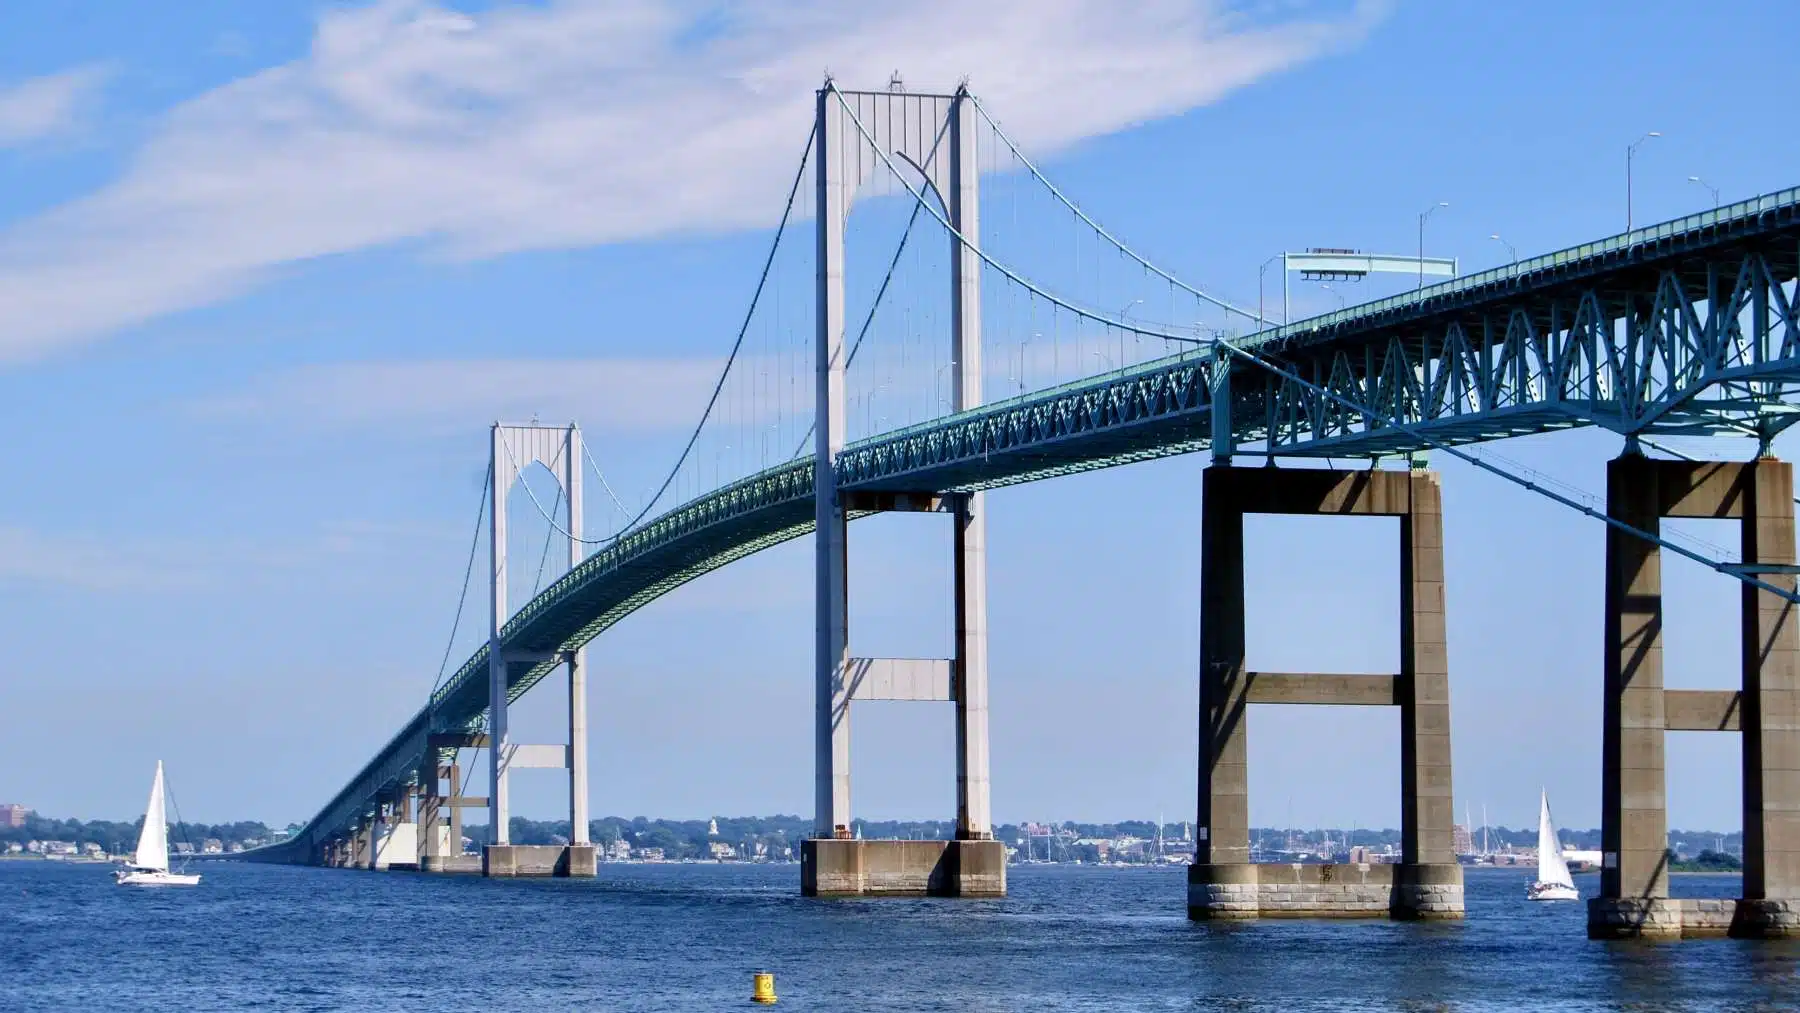 Jameson Boyd: Cashless businesses are illegal for retailers in RI, so why is the Newport Bridge an exception?